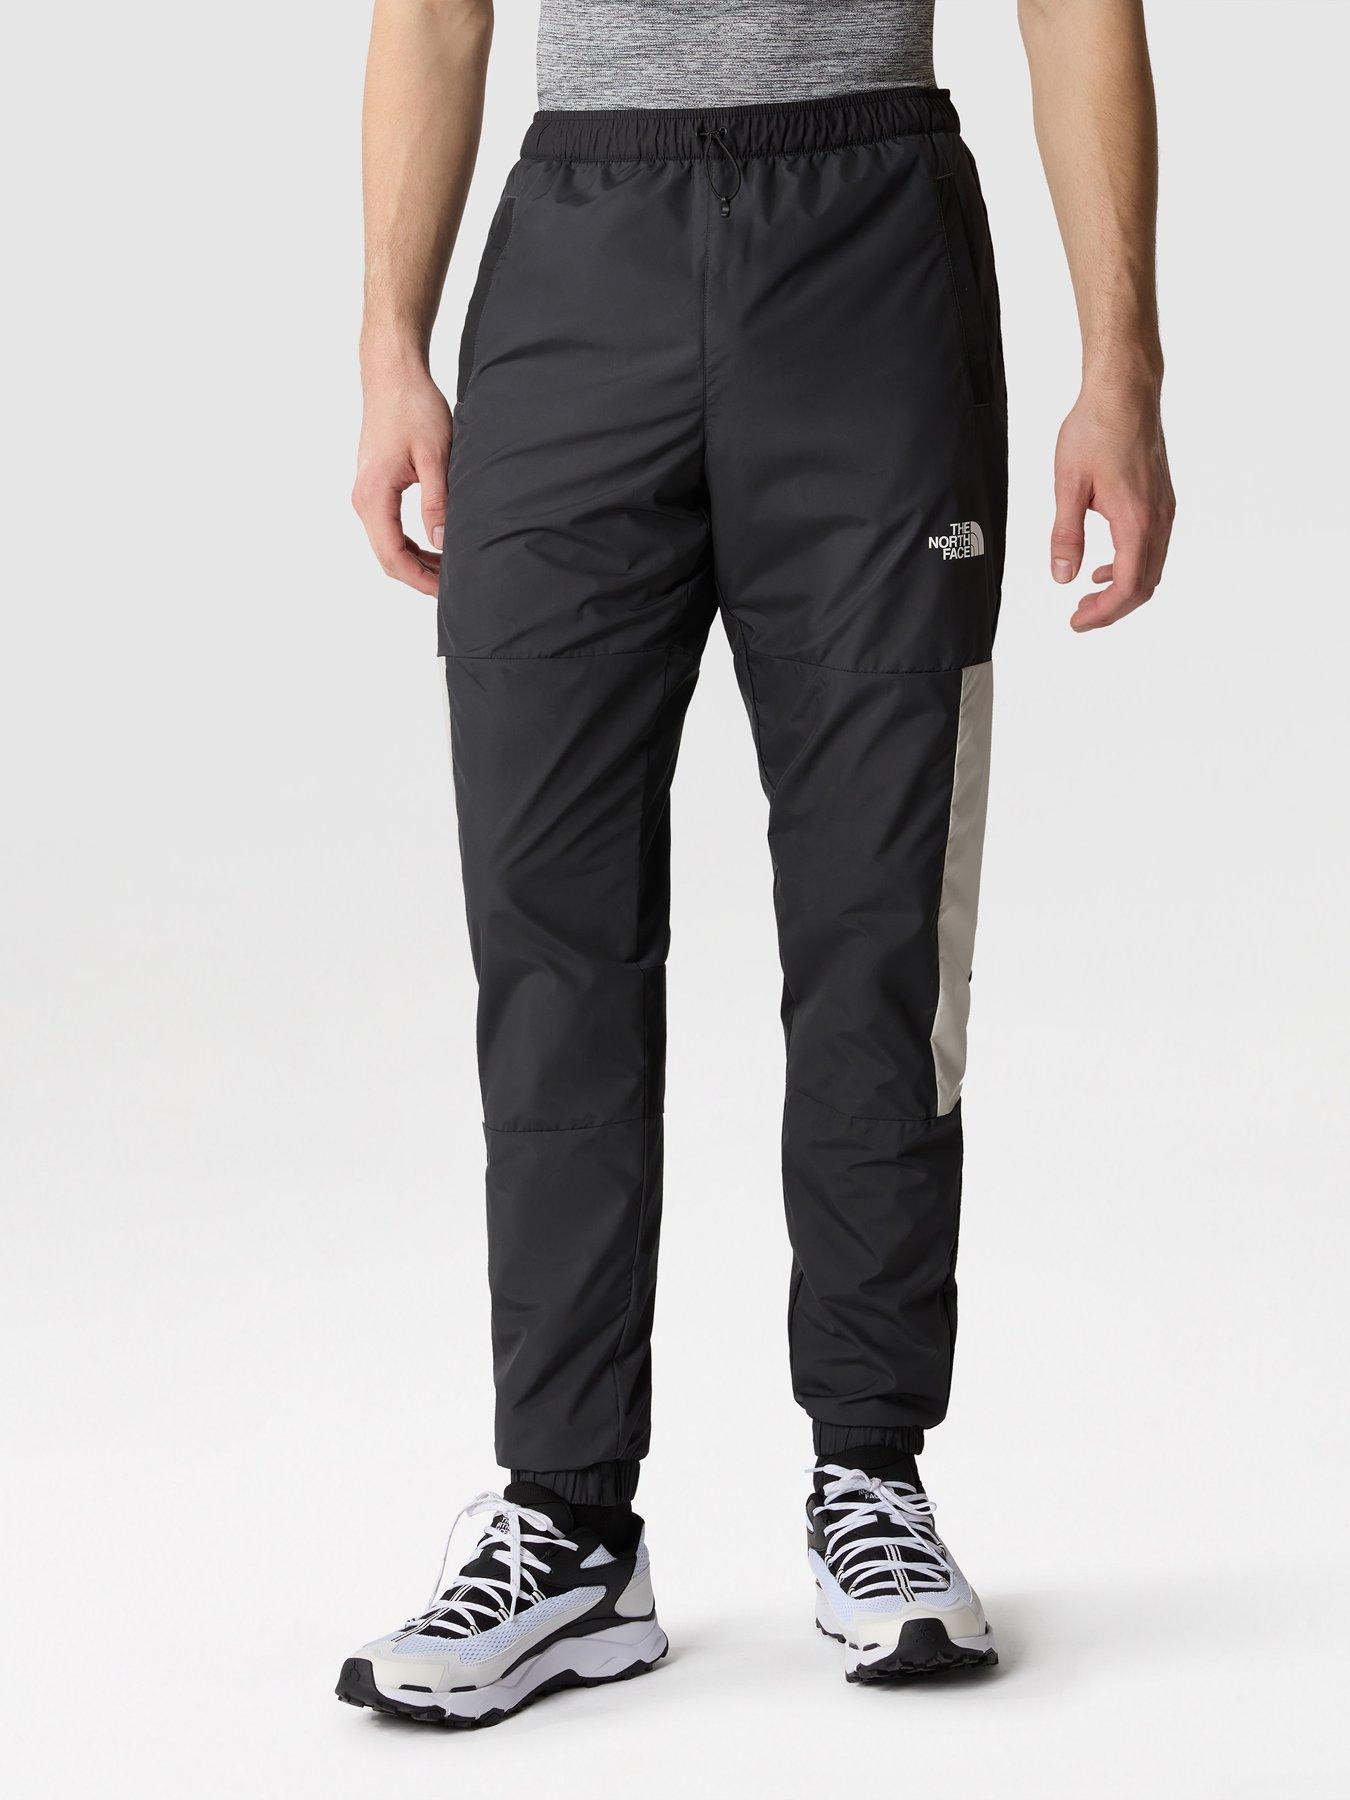 THE NORTH FACE Mountain Athletics Wind Track Pants | littlewoods.com